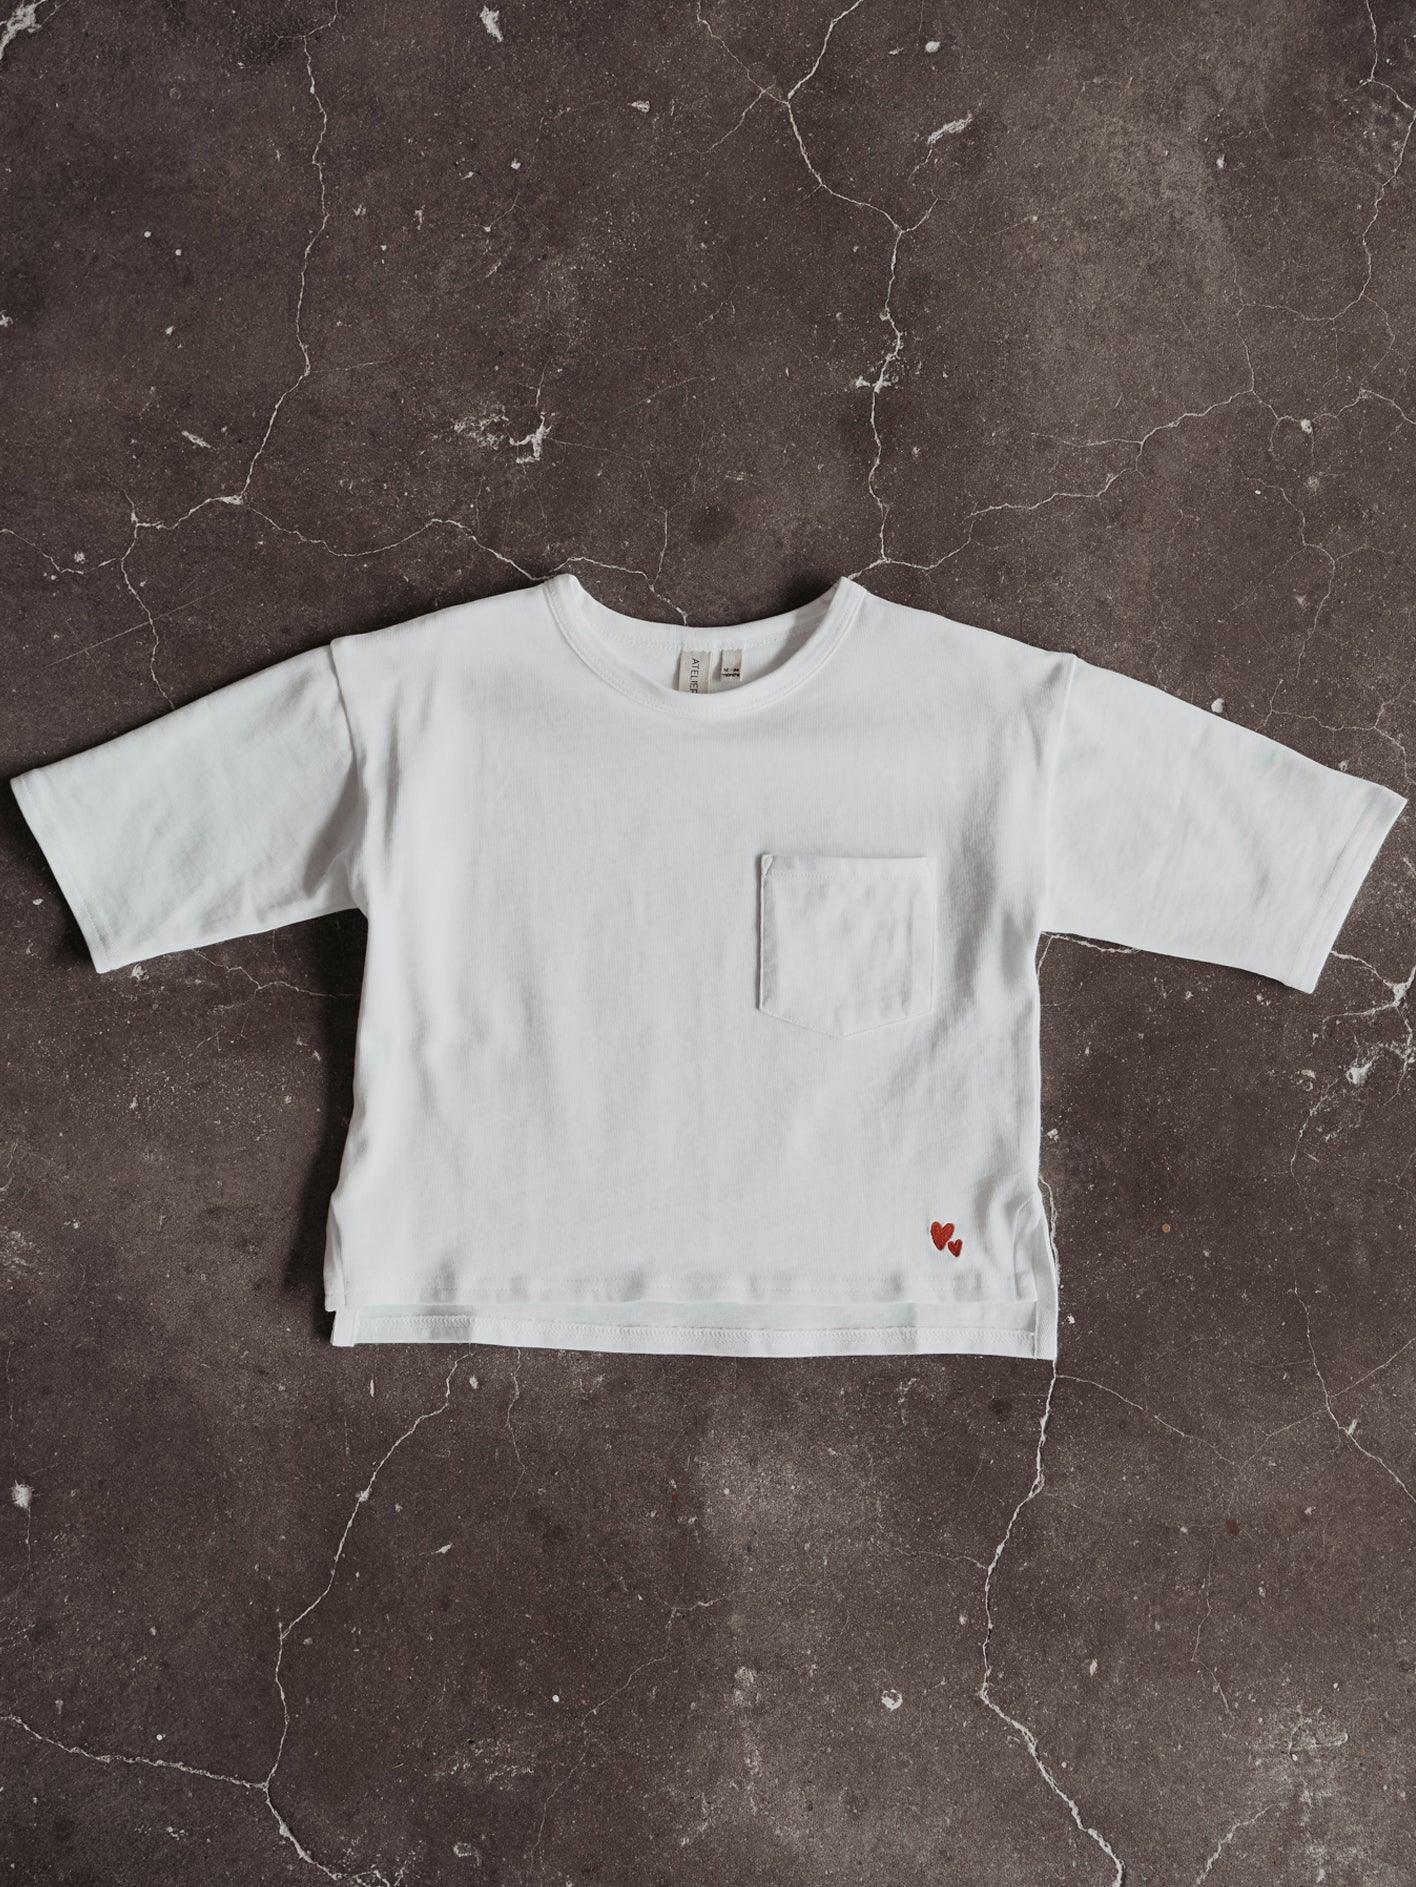 Cool Longsleeve Mini - The Little One • Family.Concept.Store. 